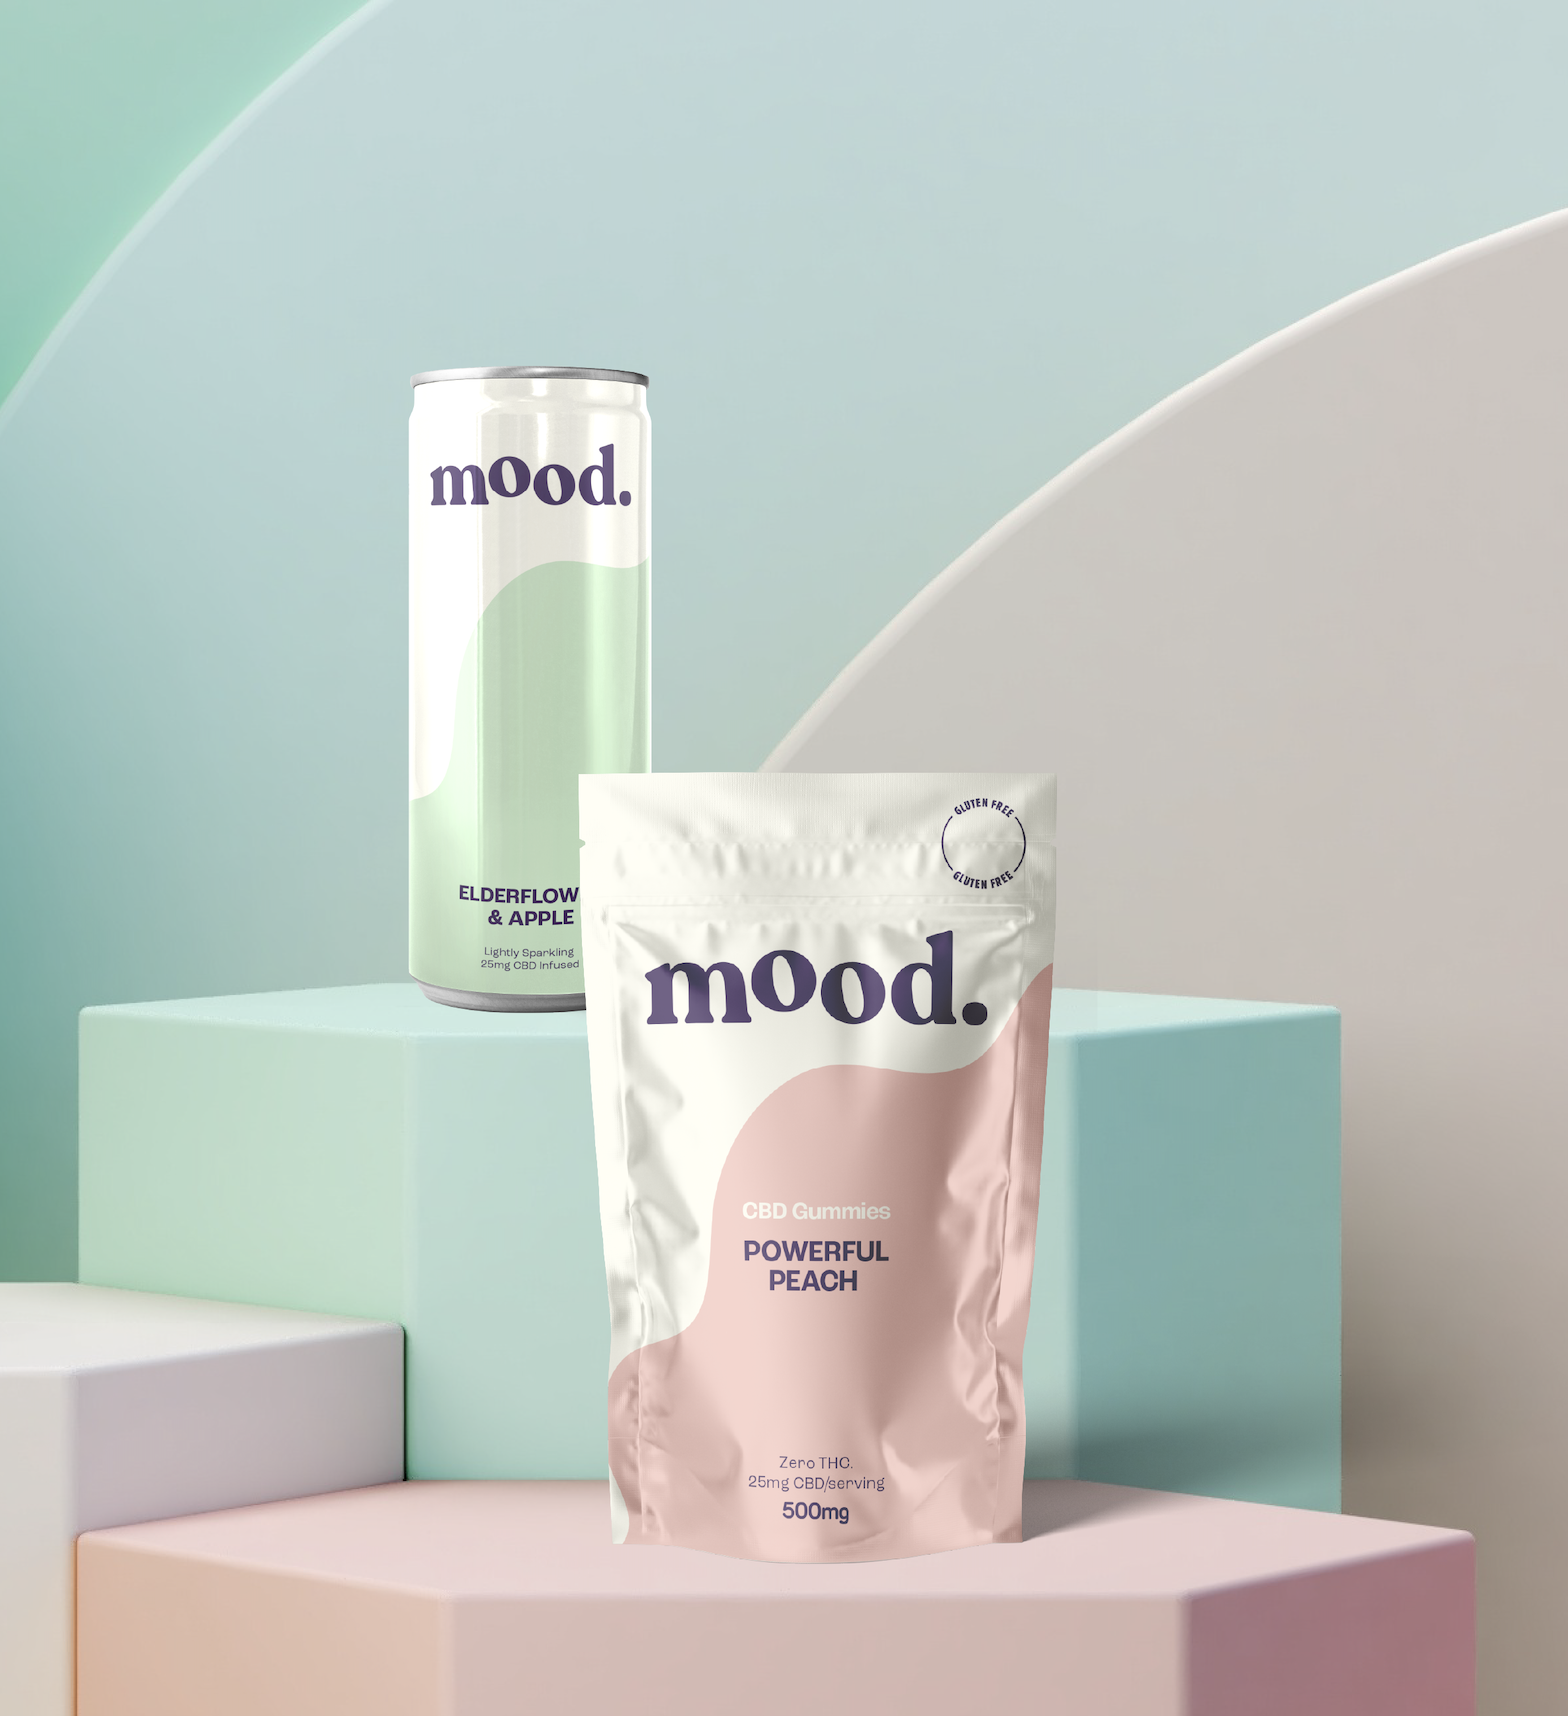 A can of Mood CBD energy drink and a stand-up pouch of Mood CBD gummies